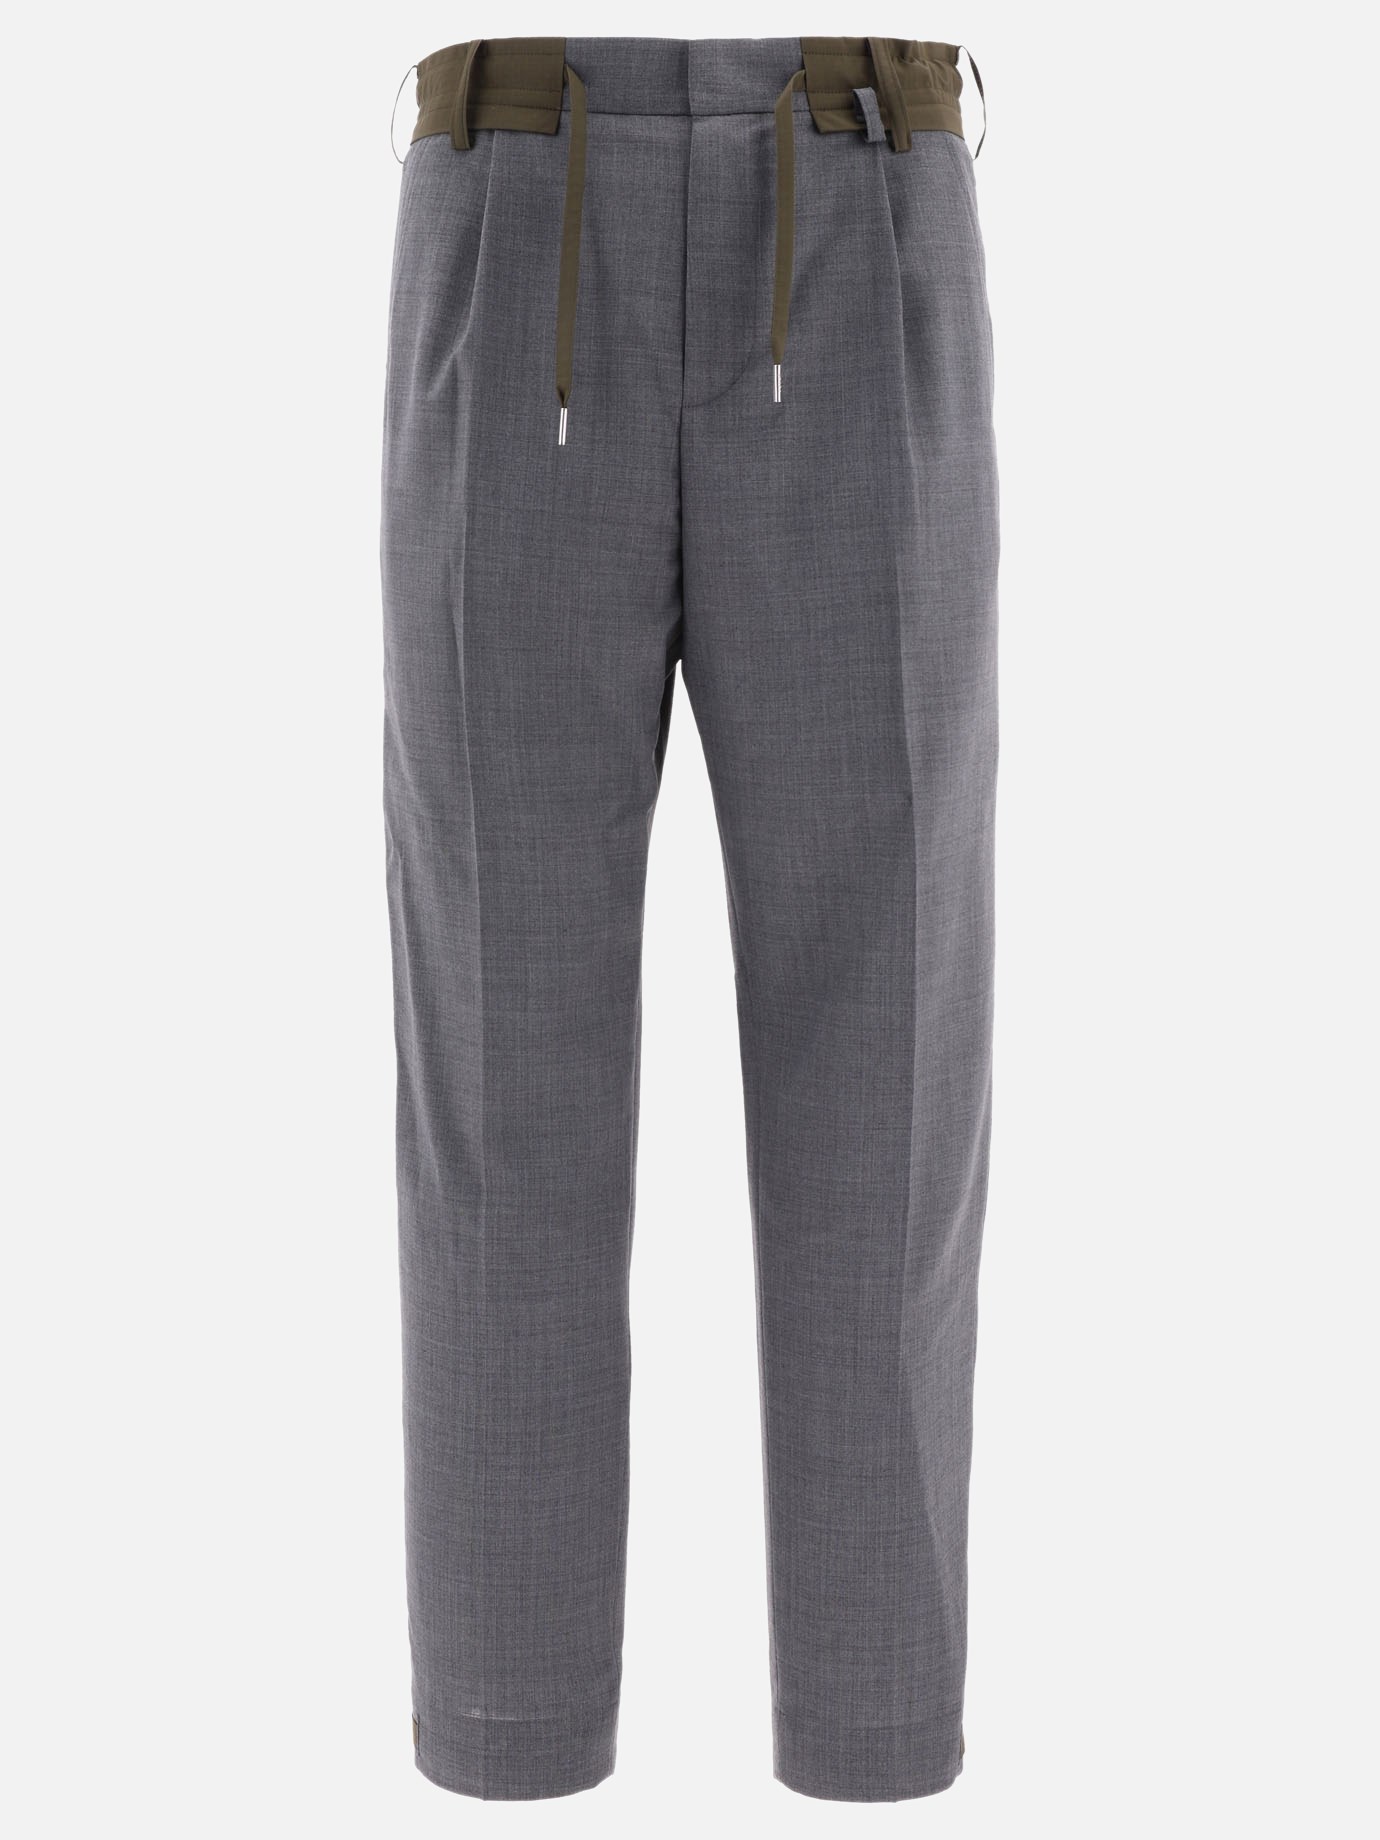 Tailored trousers with contrast details